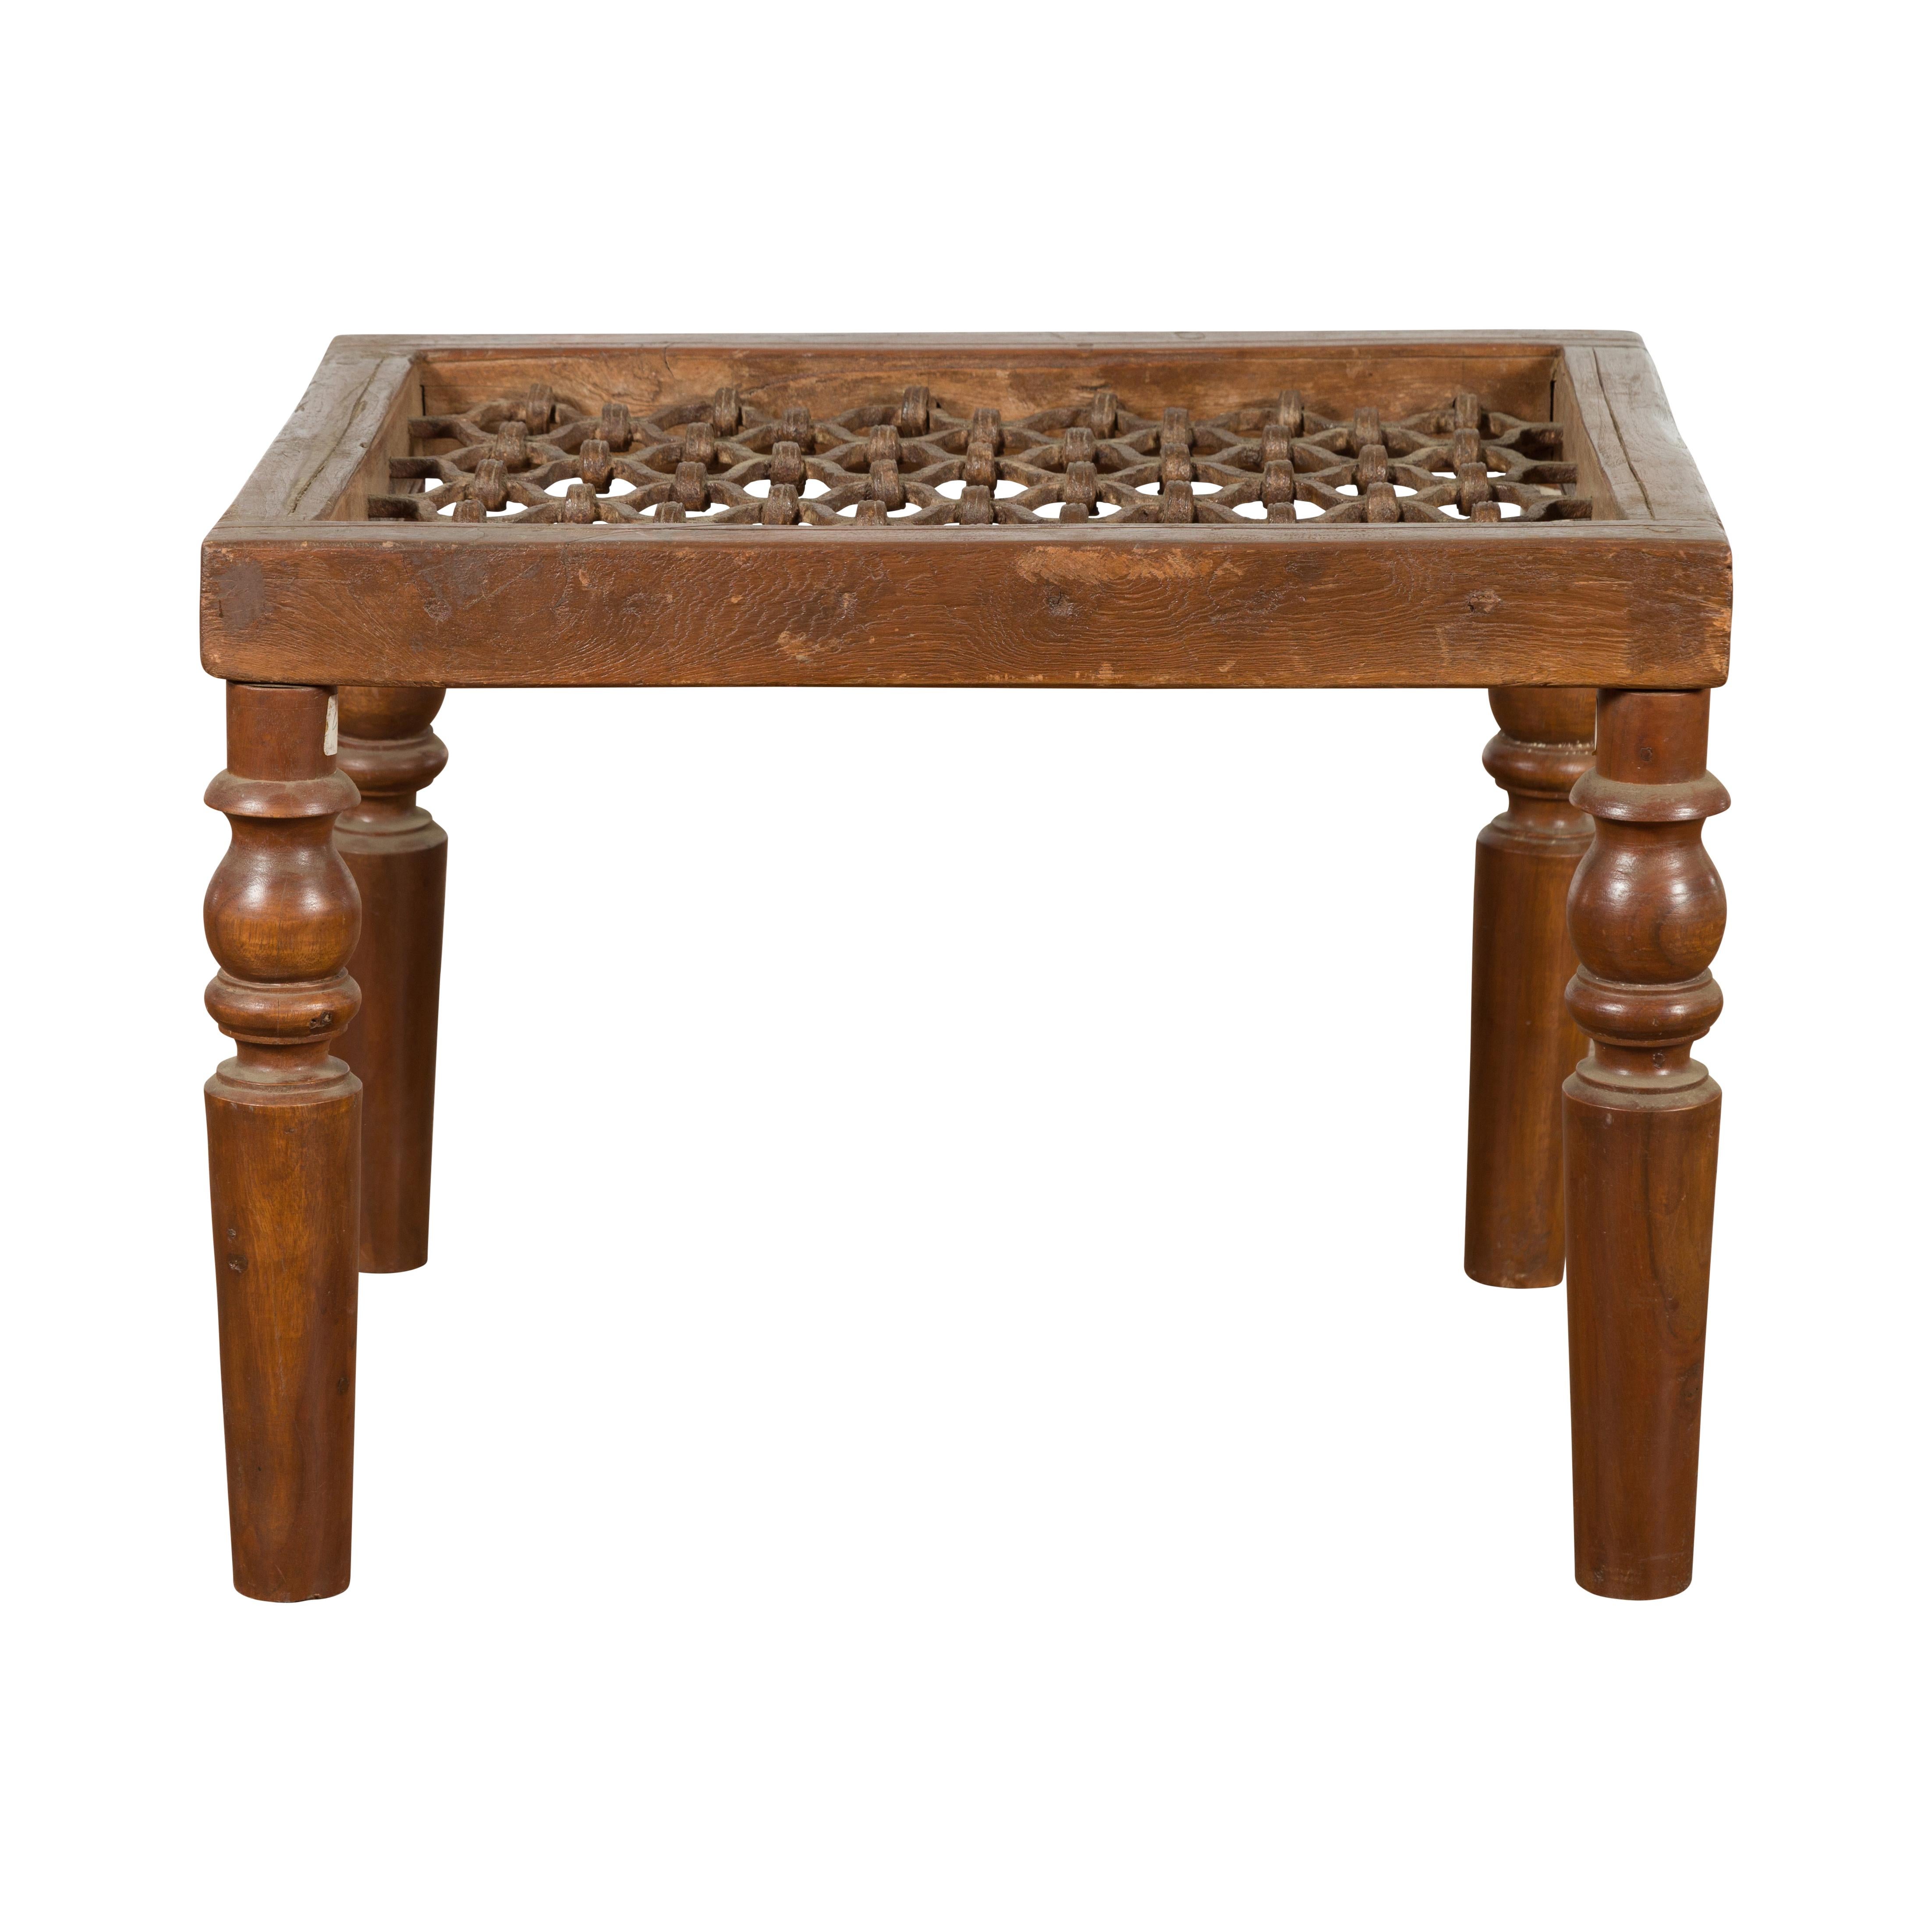 An antique rustic Indian window grate from the 19th century, made into a coffee table with baluster legs and weathered appearance. We have more assorted sizes available, please contact us with any questions. Created in India during the 19th century,